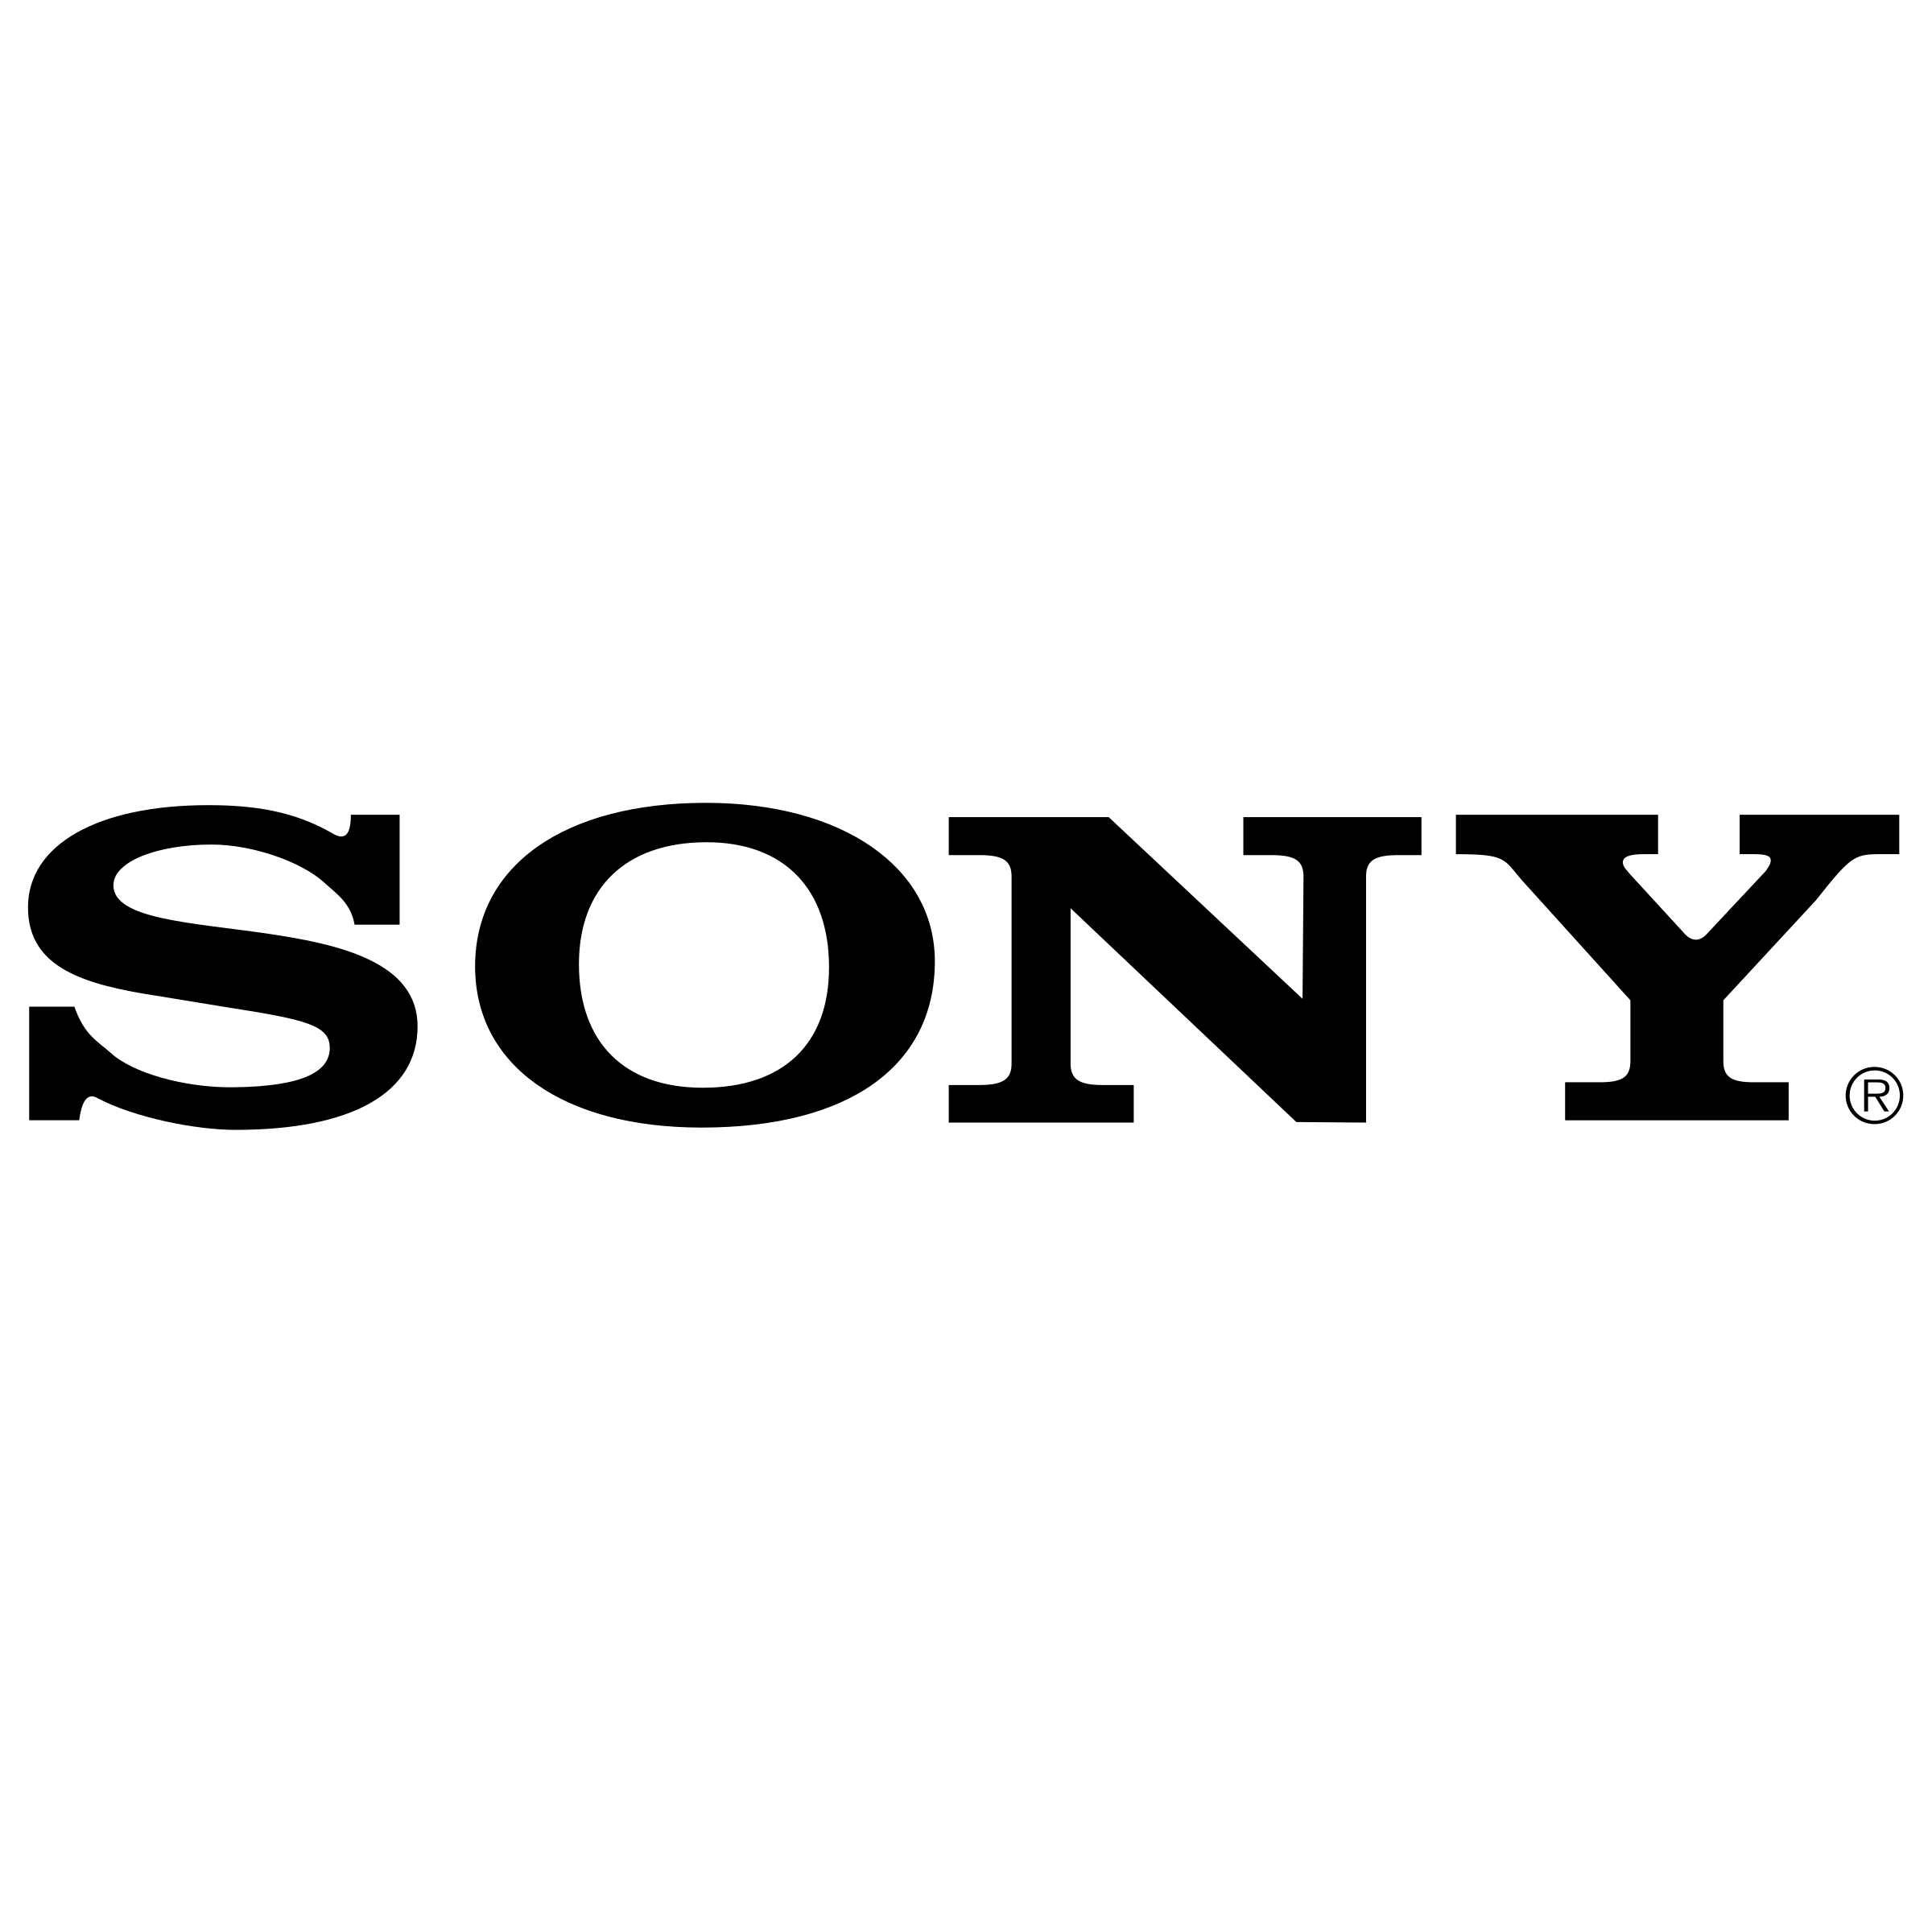 sony-2-logo-png-transparent.png